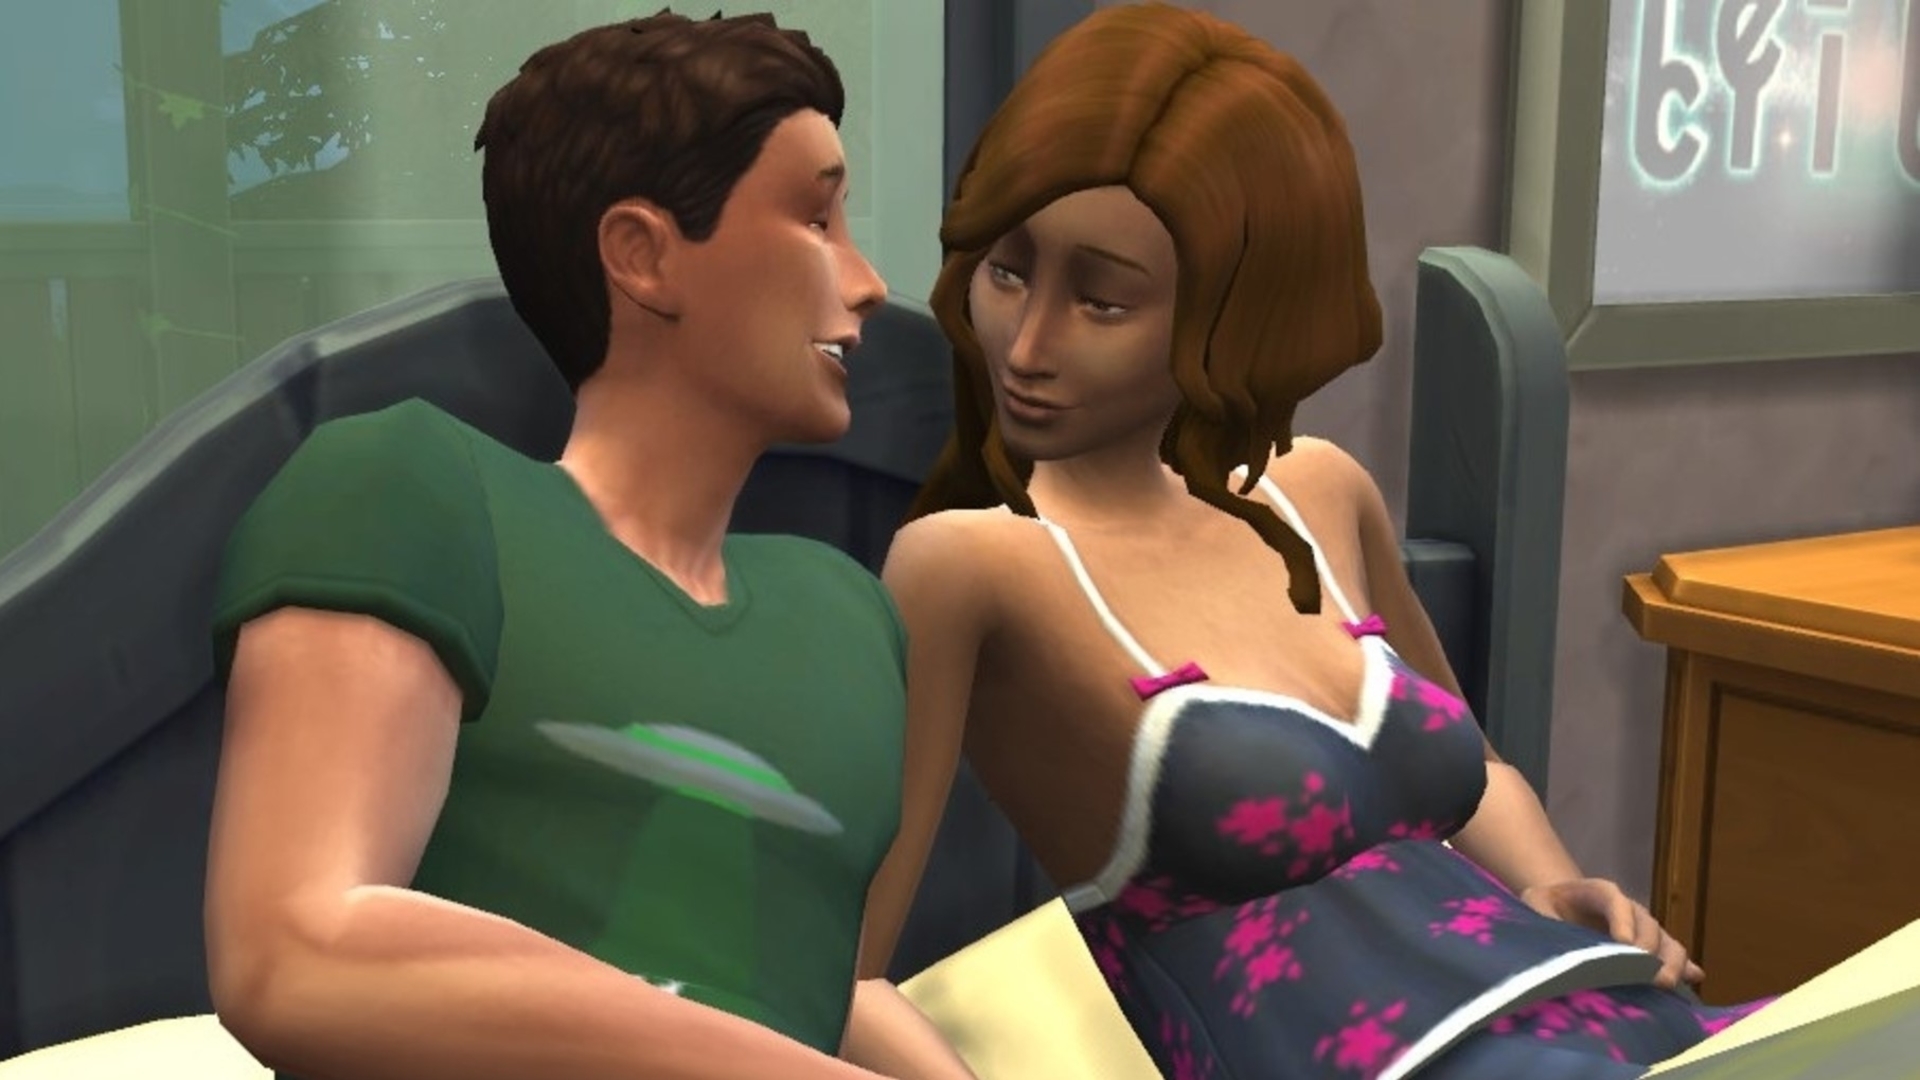 Sims sex mods in Athens